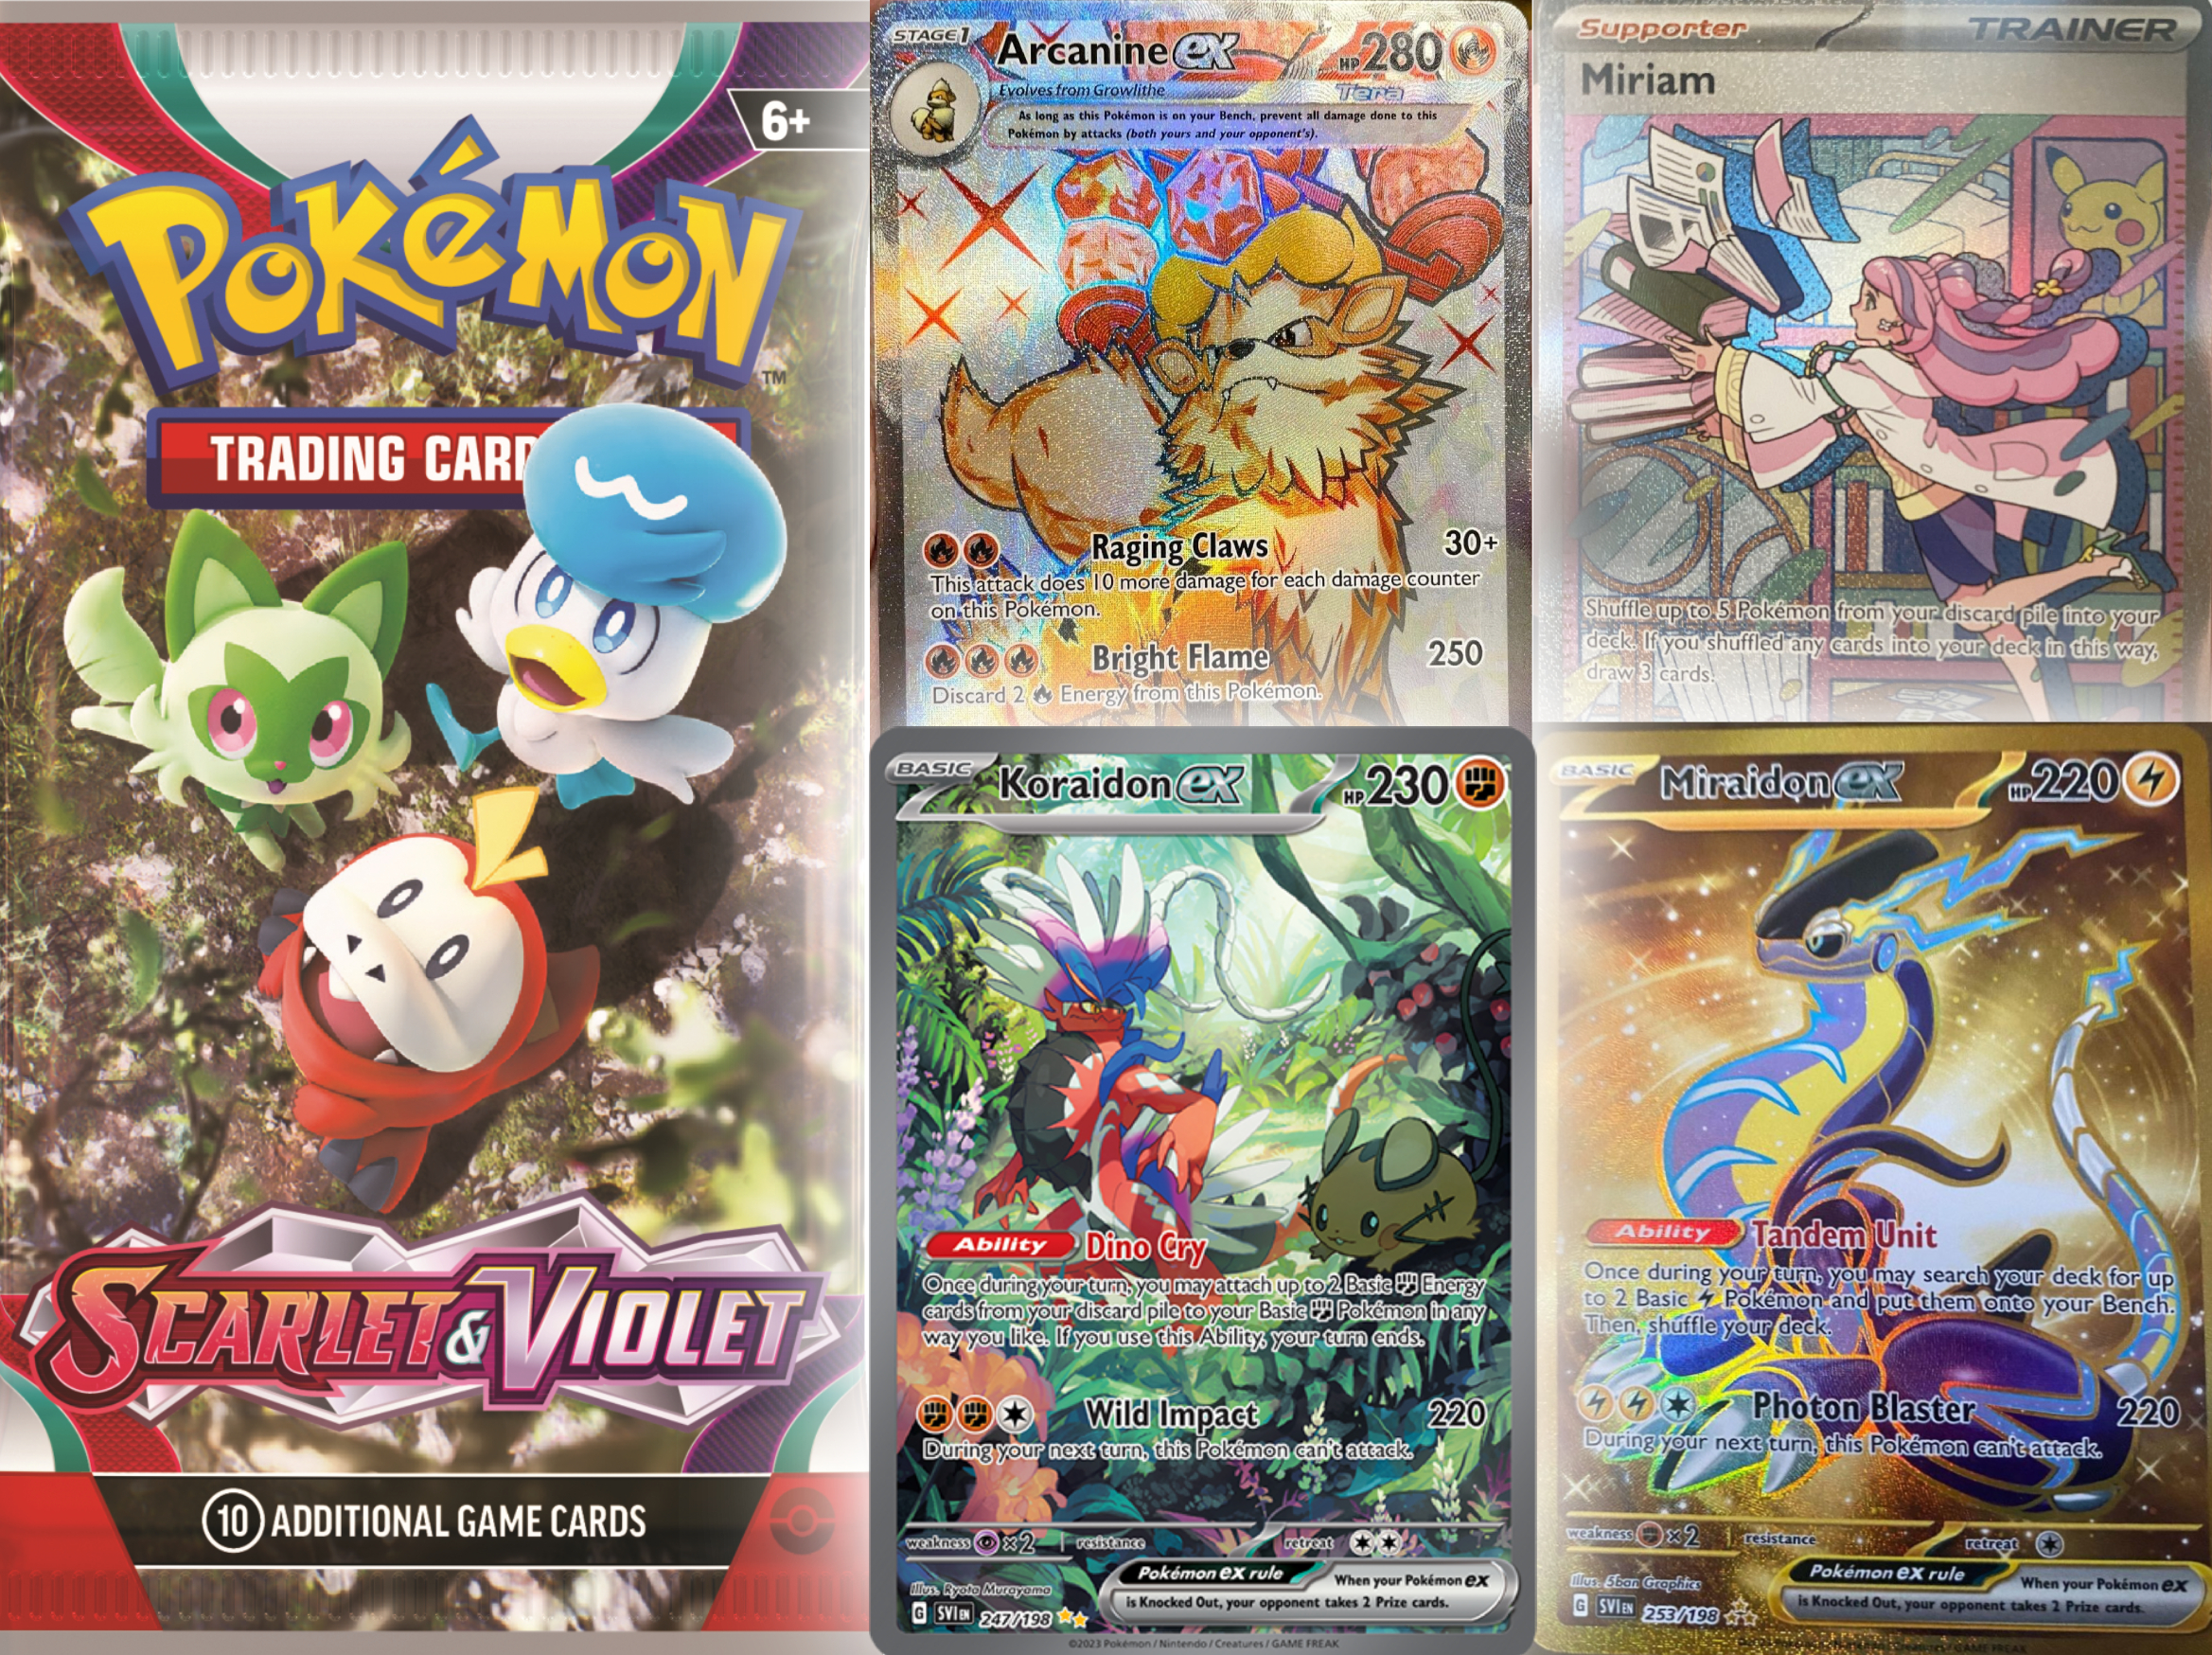 Pokemon Scarlet & Violet - 18th Nov 2022! **OFFICIAL INFO ONLY**, Page 68